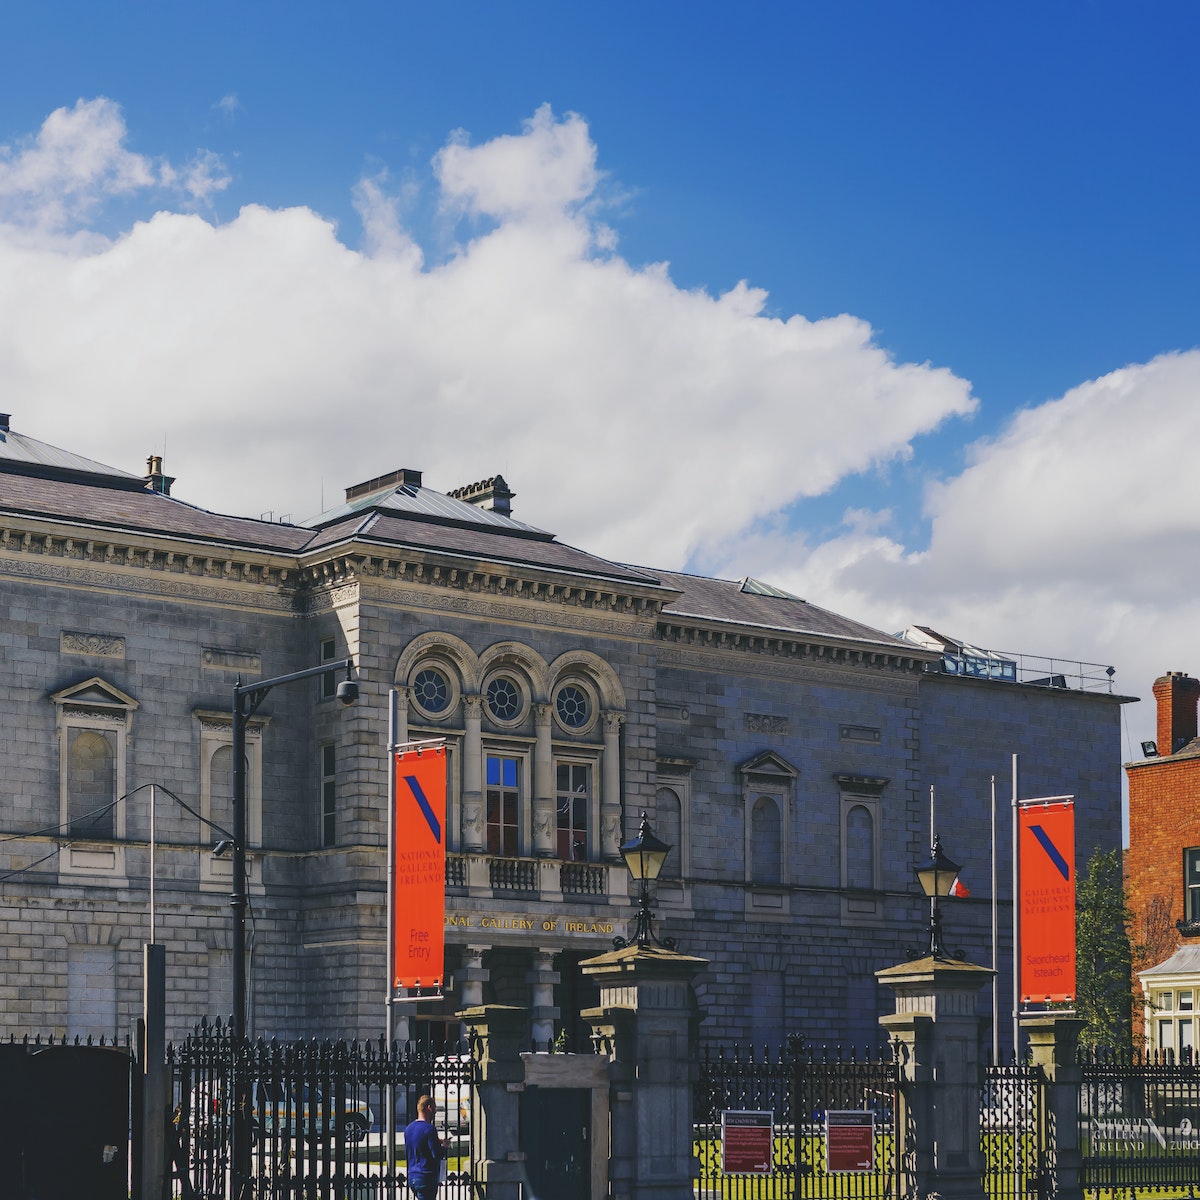 DUBLIN, IRELAND - 10th June, 2017: the beautiful architecture of the National Gallery of Ireland in Dublin city centre